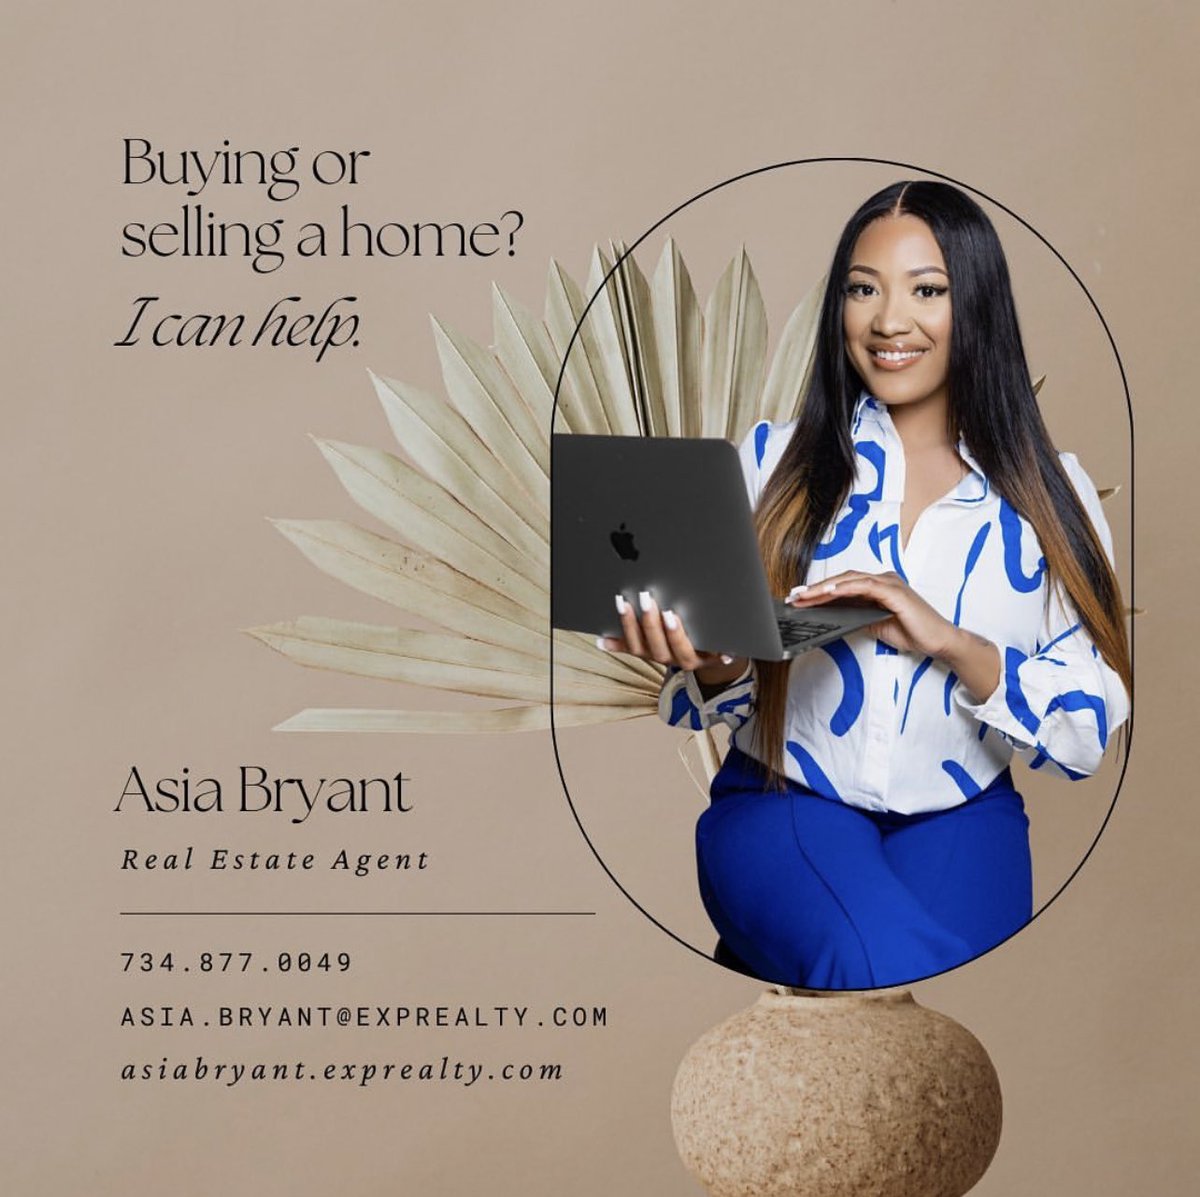 NEW LISTING ALERT! 🚨 

Asia Bryant, Realtor
 📧: asia.bryant@exprealty.com

#DetroitRealEstate #CommercialProperty #InvestmentOpportunity #BusinessPotential #Entrepreneurship #MichiganProperties#WestSideDetroit #RealEstateInvesting #ProfitableVenture